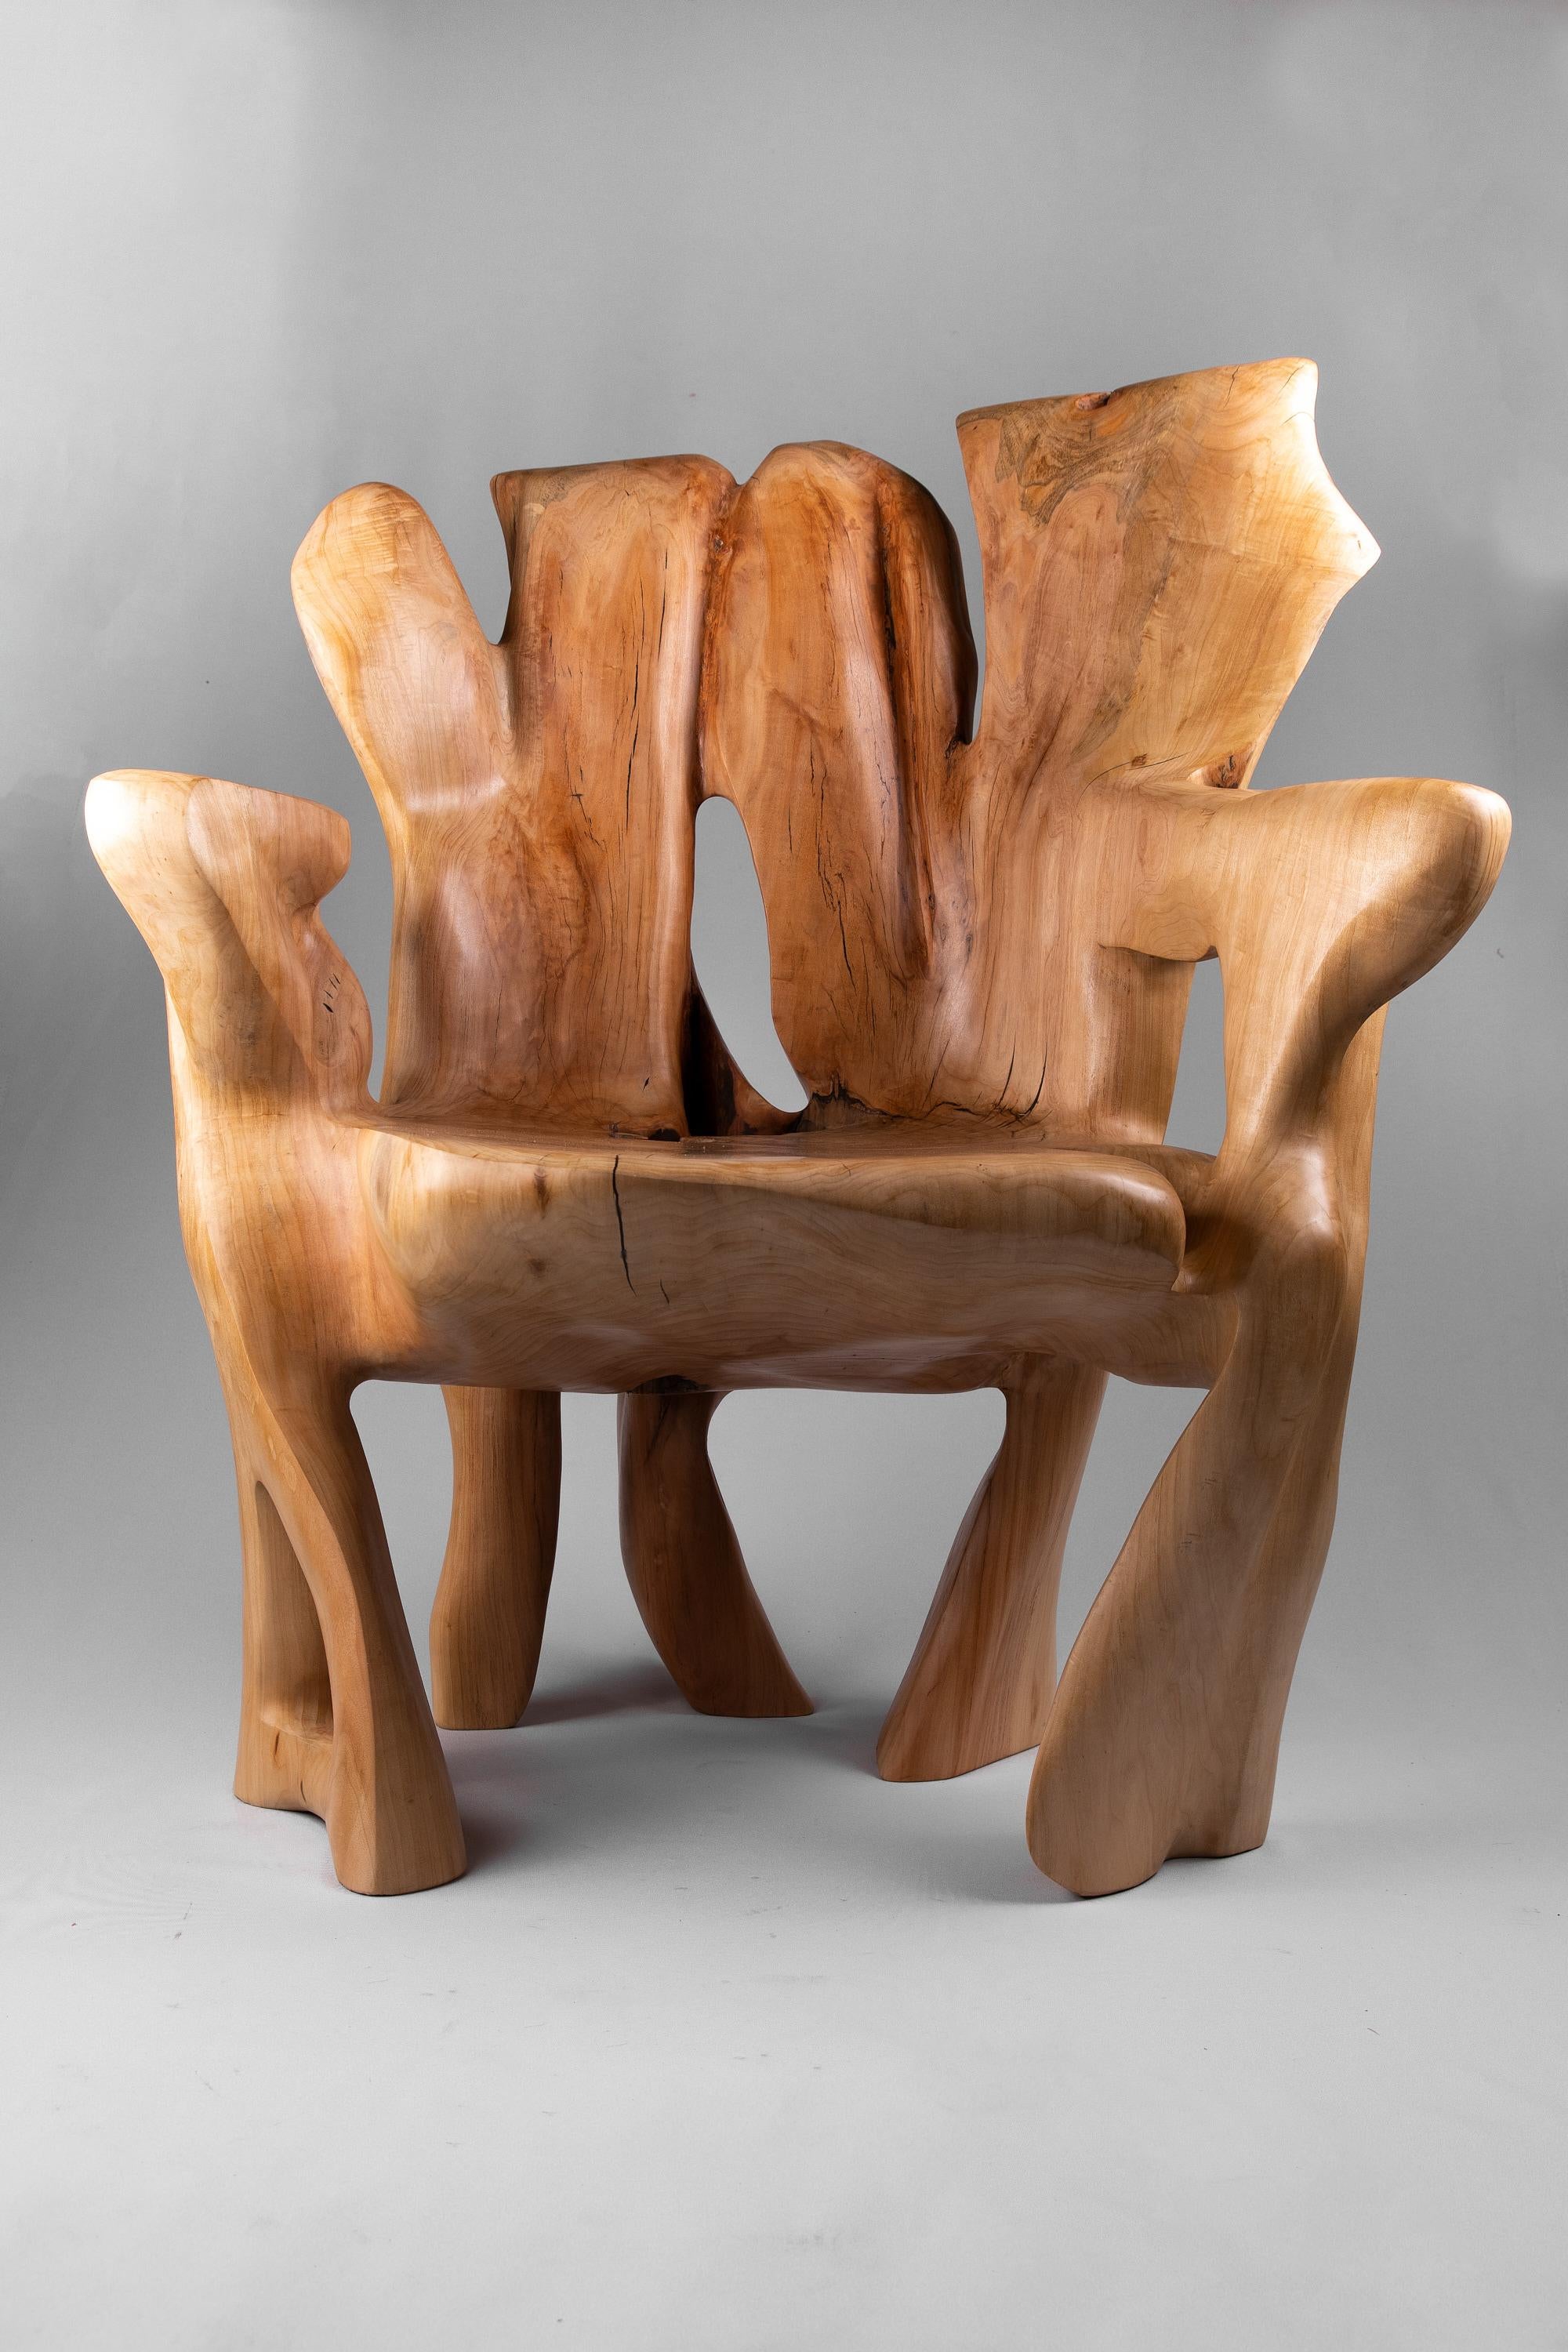 Unique functional sculpture carved from a single piece of wood in the shape of an armchair. Each piece in our production is carved by artists with basic wood carving power tools. Every chair is made as unique as it can be, with dedication to each